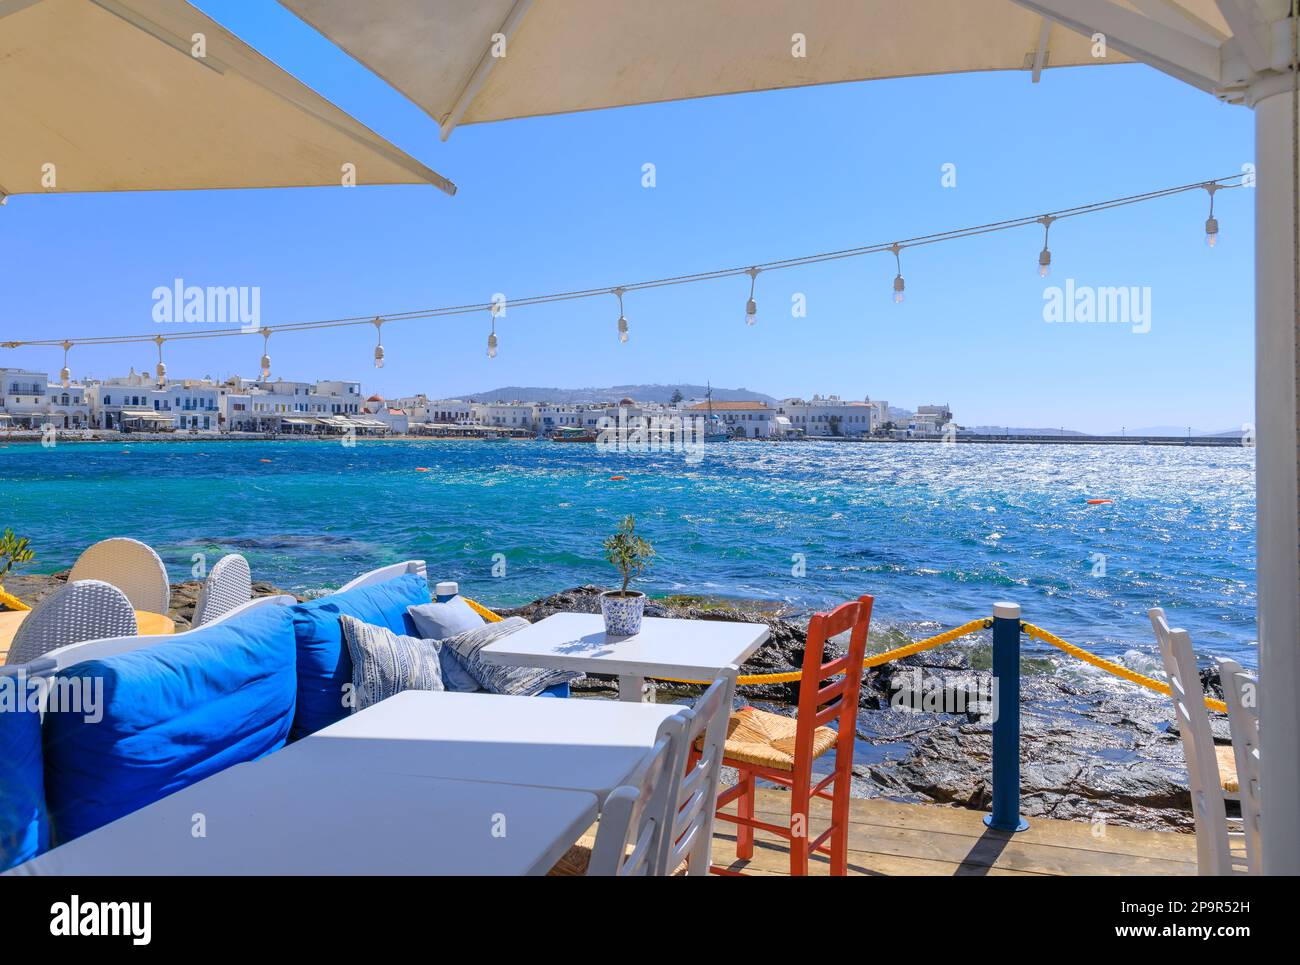 Skyline of the Mykonos town in Greece: view of the harbor from a typical restaurant on the seashore. Stock Photo